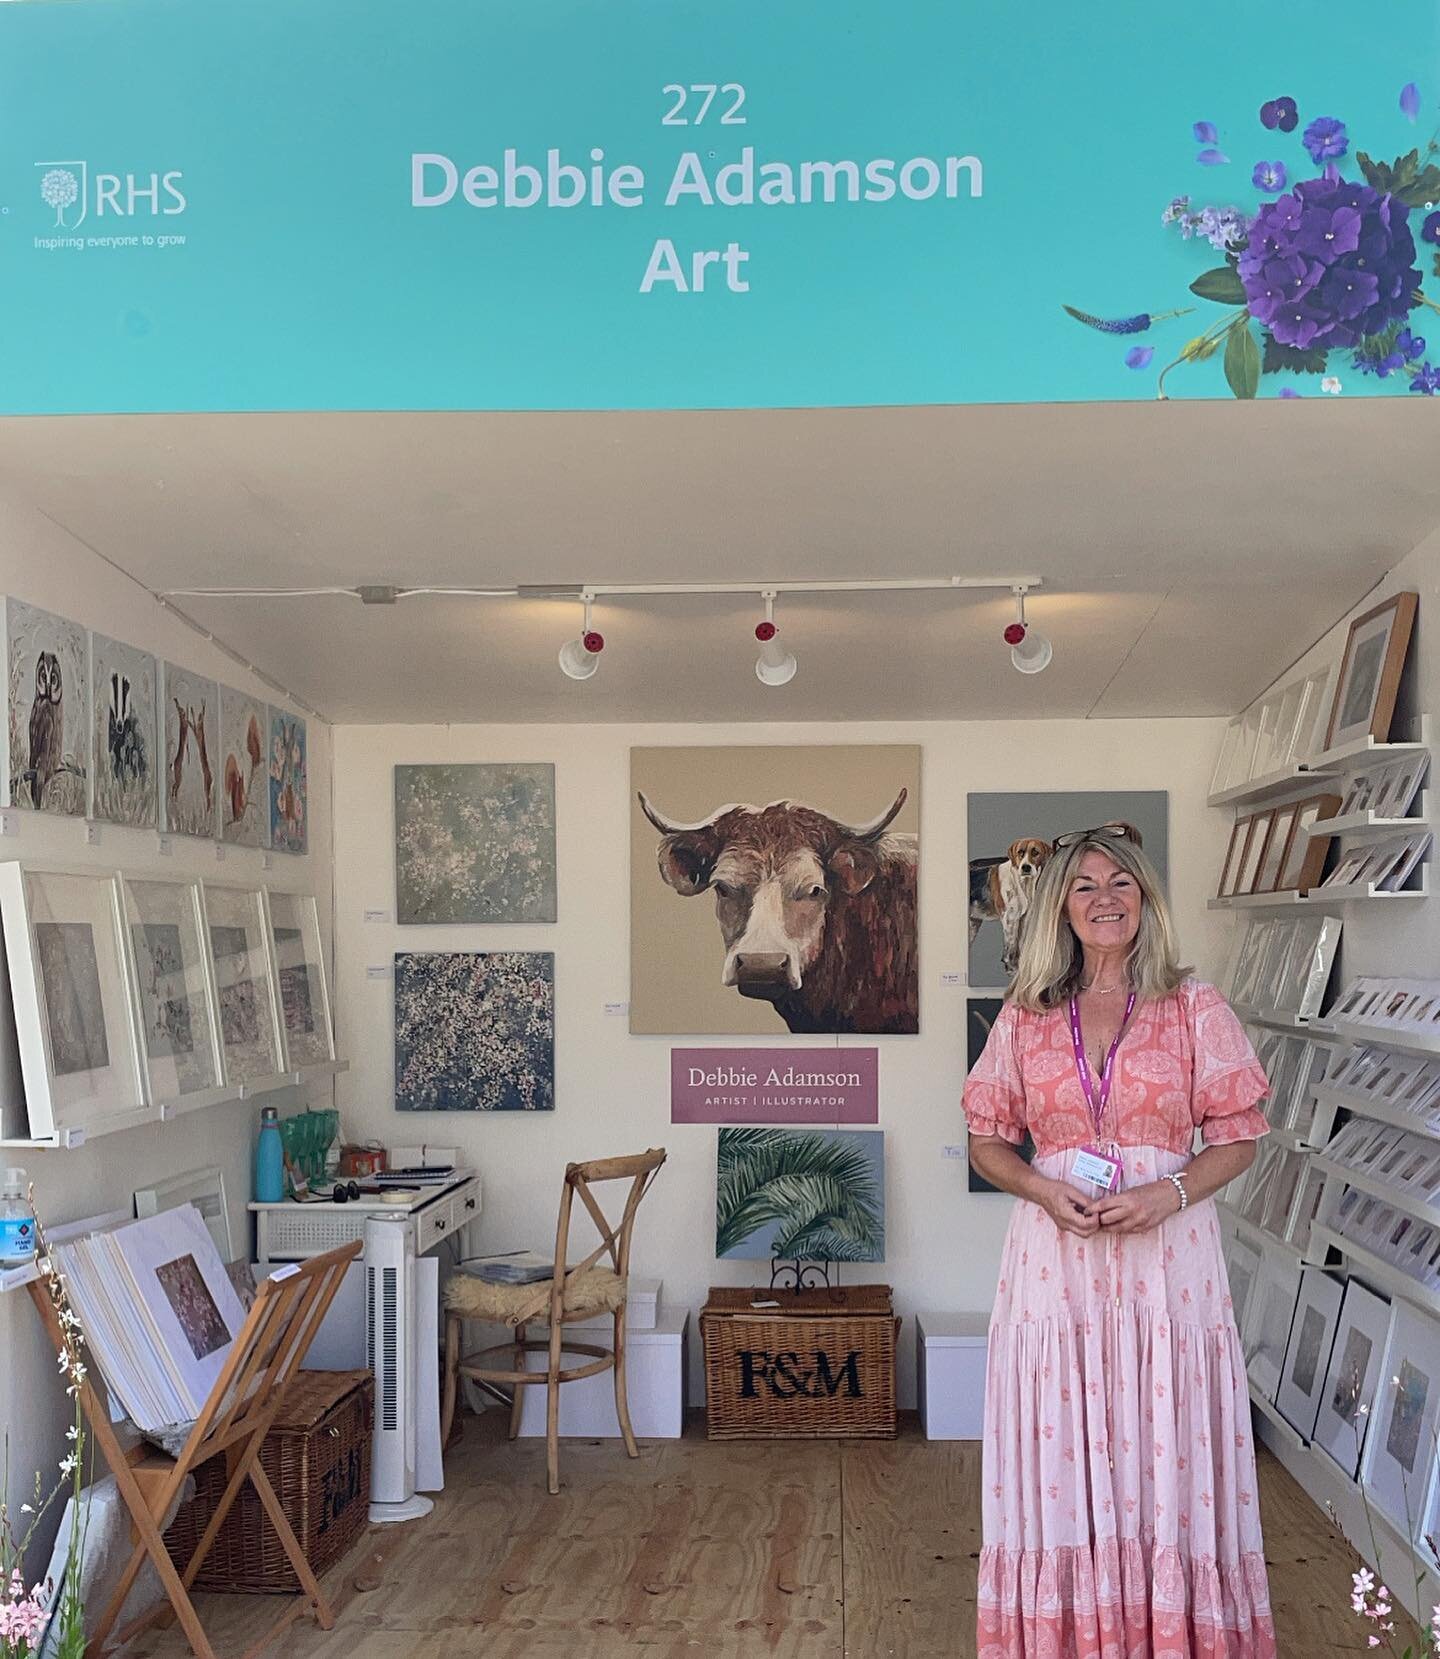 &ldquo;What a great show!&rdquo;
A massive thank you to everyone who visited my stand at RHS Tatton, lovely to see faces old and new and great to finally feel some normality🌸🌷🌻

.
.
.

#debbieadamsonart #rhs #rhstatton #rhstattonpark #rhstattonflo